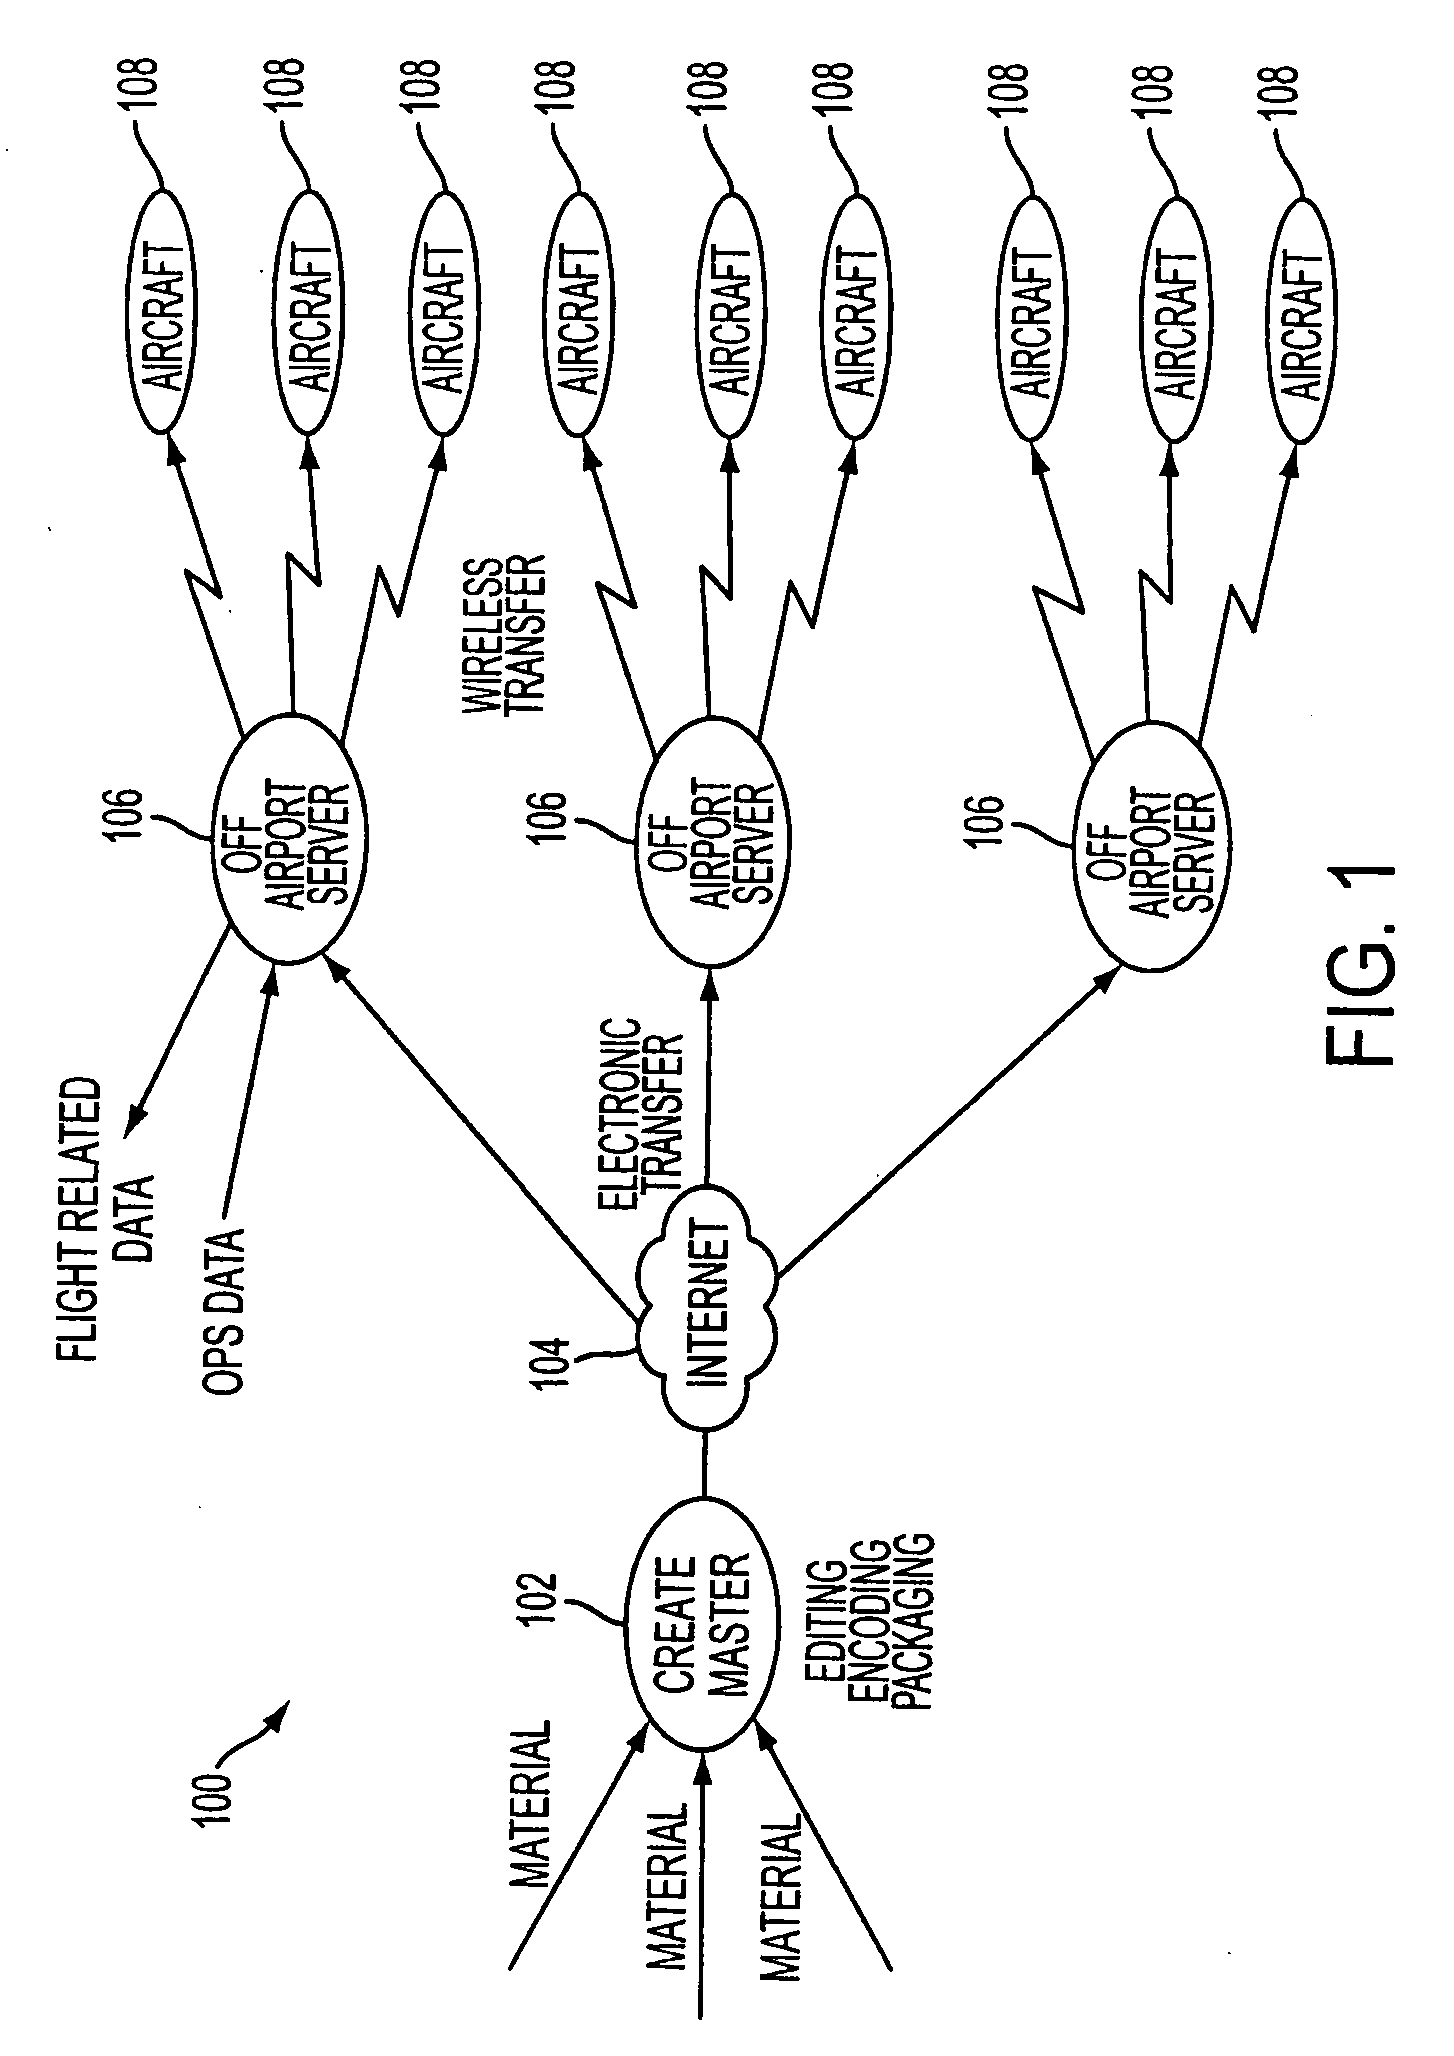 System and method for wirelessly transferring content to and from an aircraft